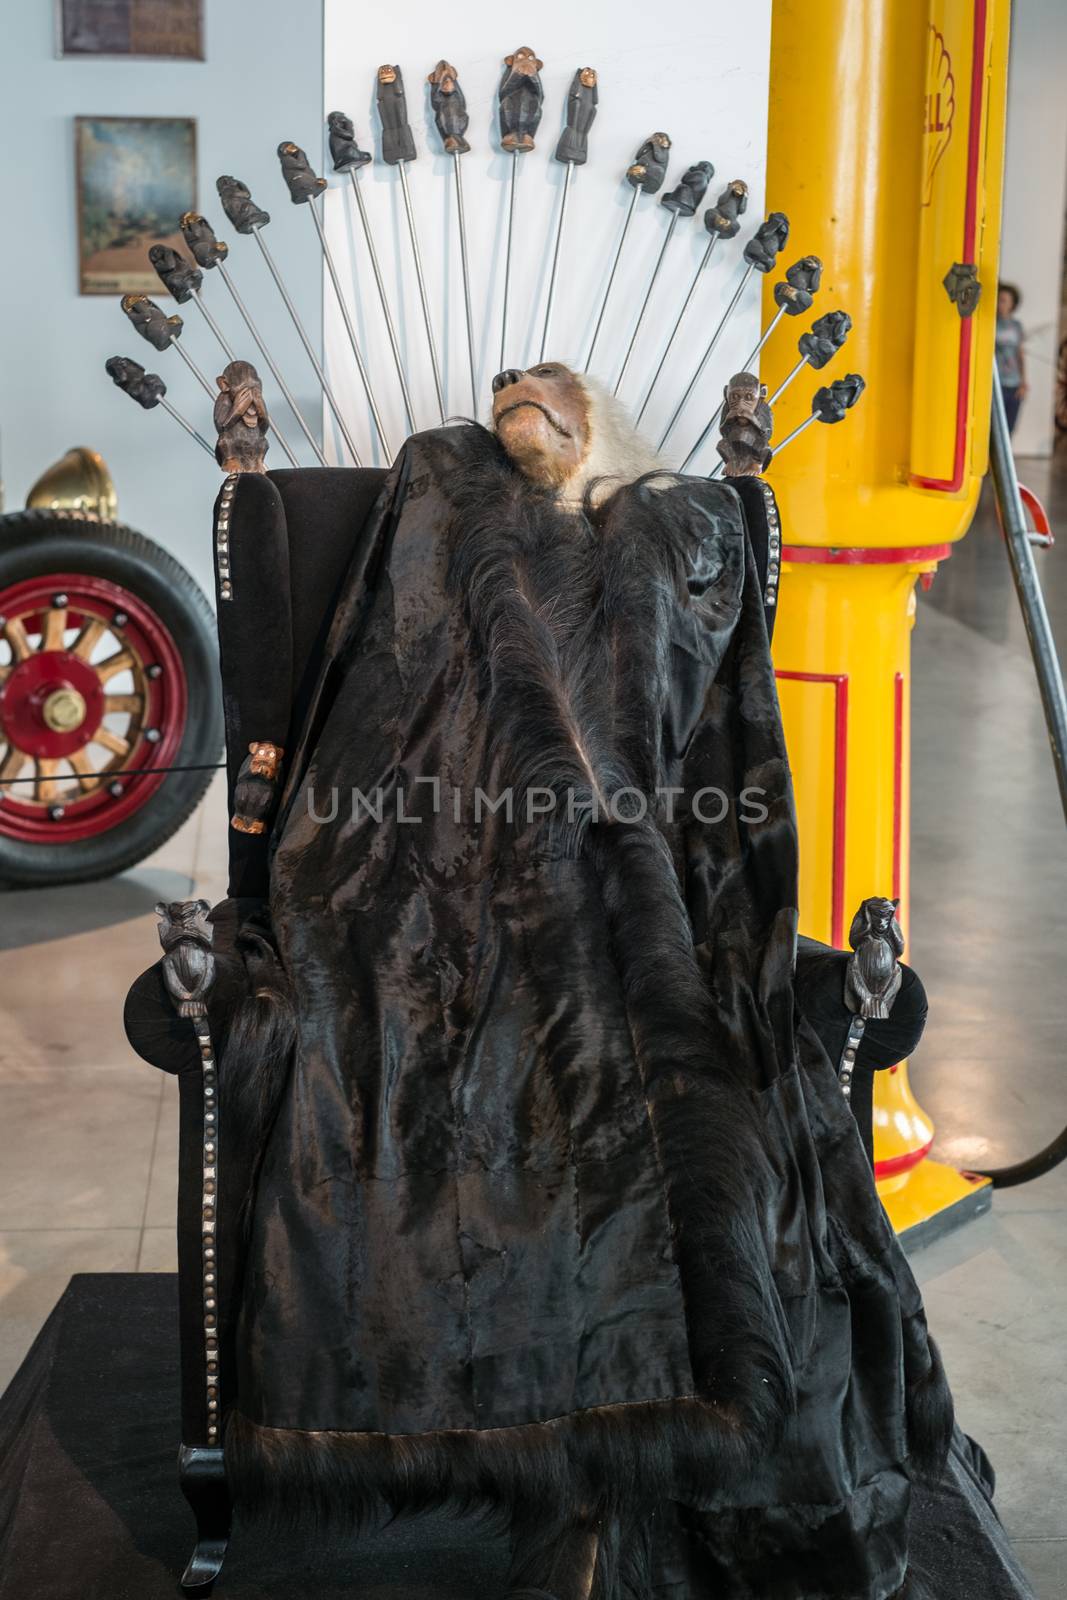 Malaga, Spain - August 19, 2018. various decorations at Automobile and Fashion Museum Malaga, Spain.